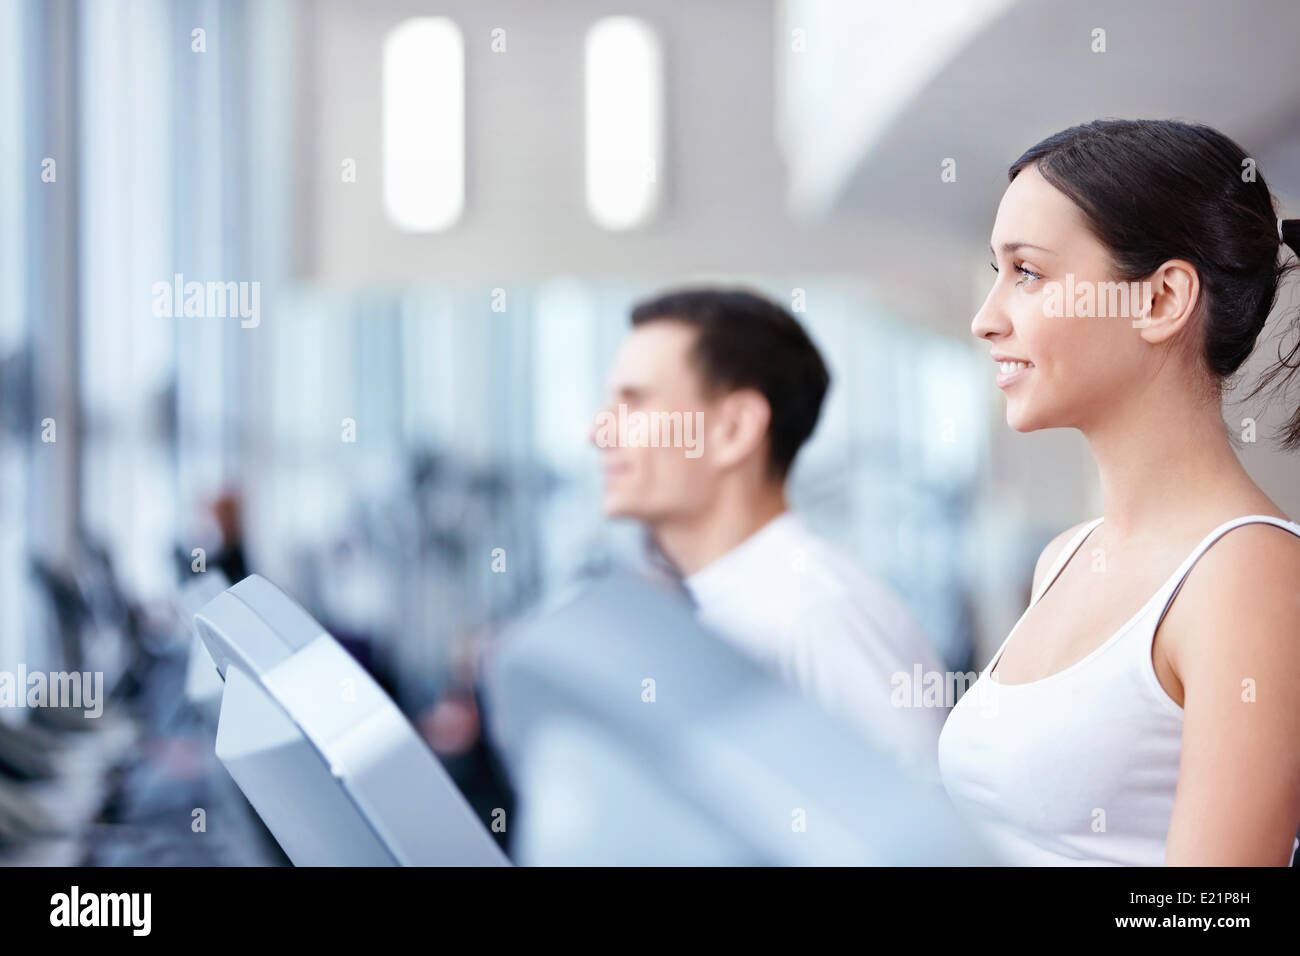 Attractive young people engaged in fitness Stock Photo